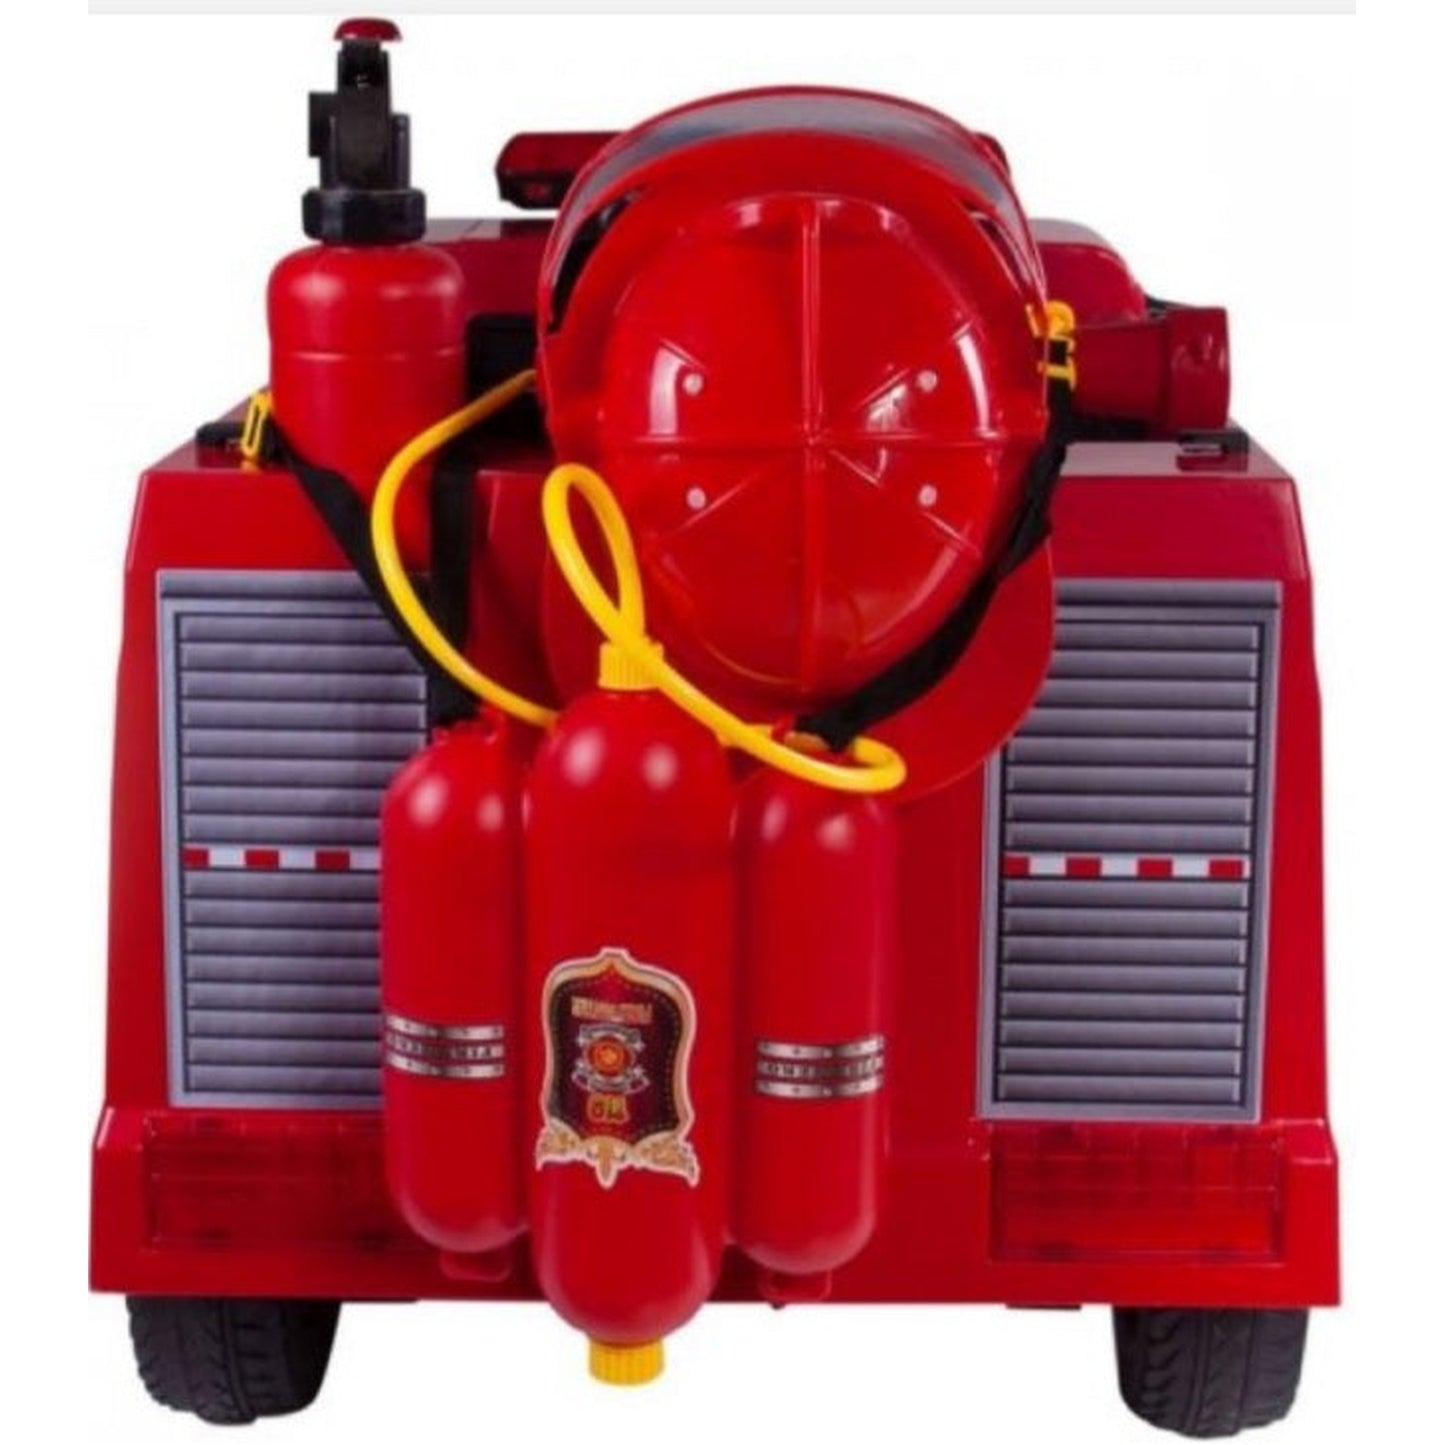 Kids Ride On Fire Engine with Accessories Leather Eva wheels Parent Remote